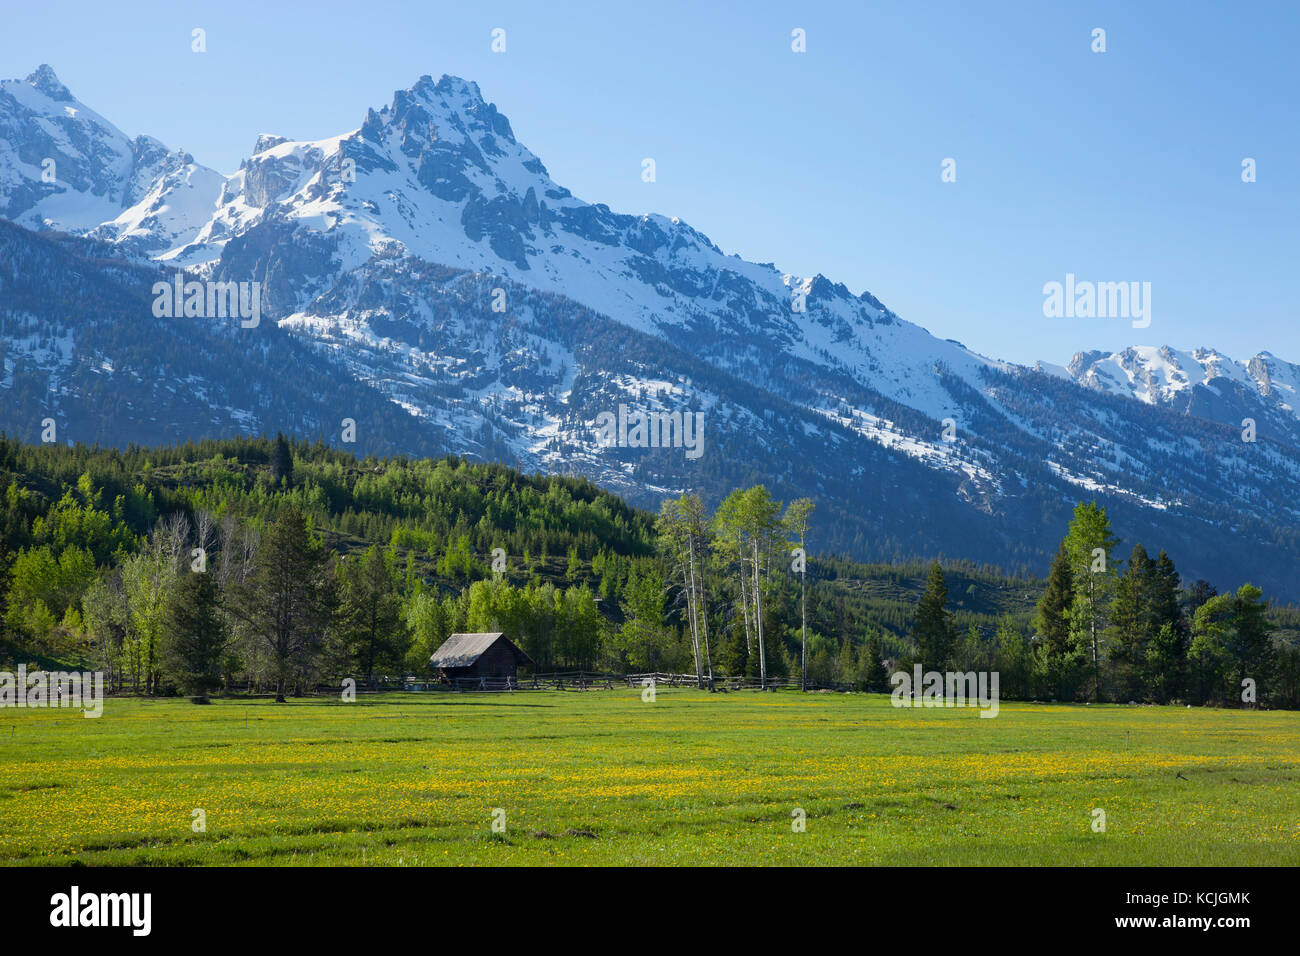 Barn and fence of horse ranch below the majestic Grand Teton mountains in Wyoming Stock Photo